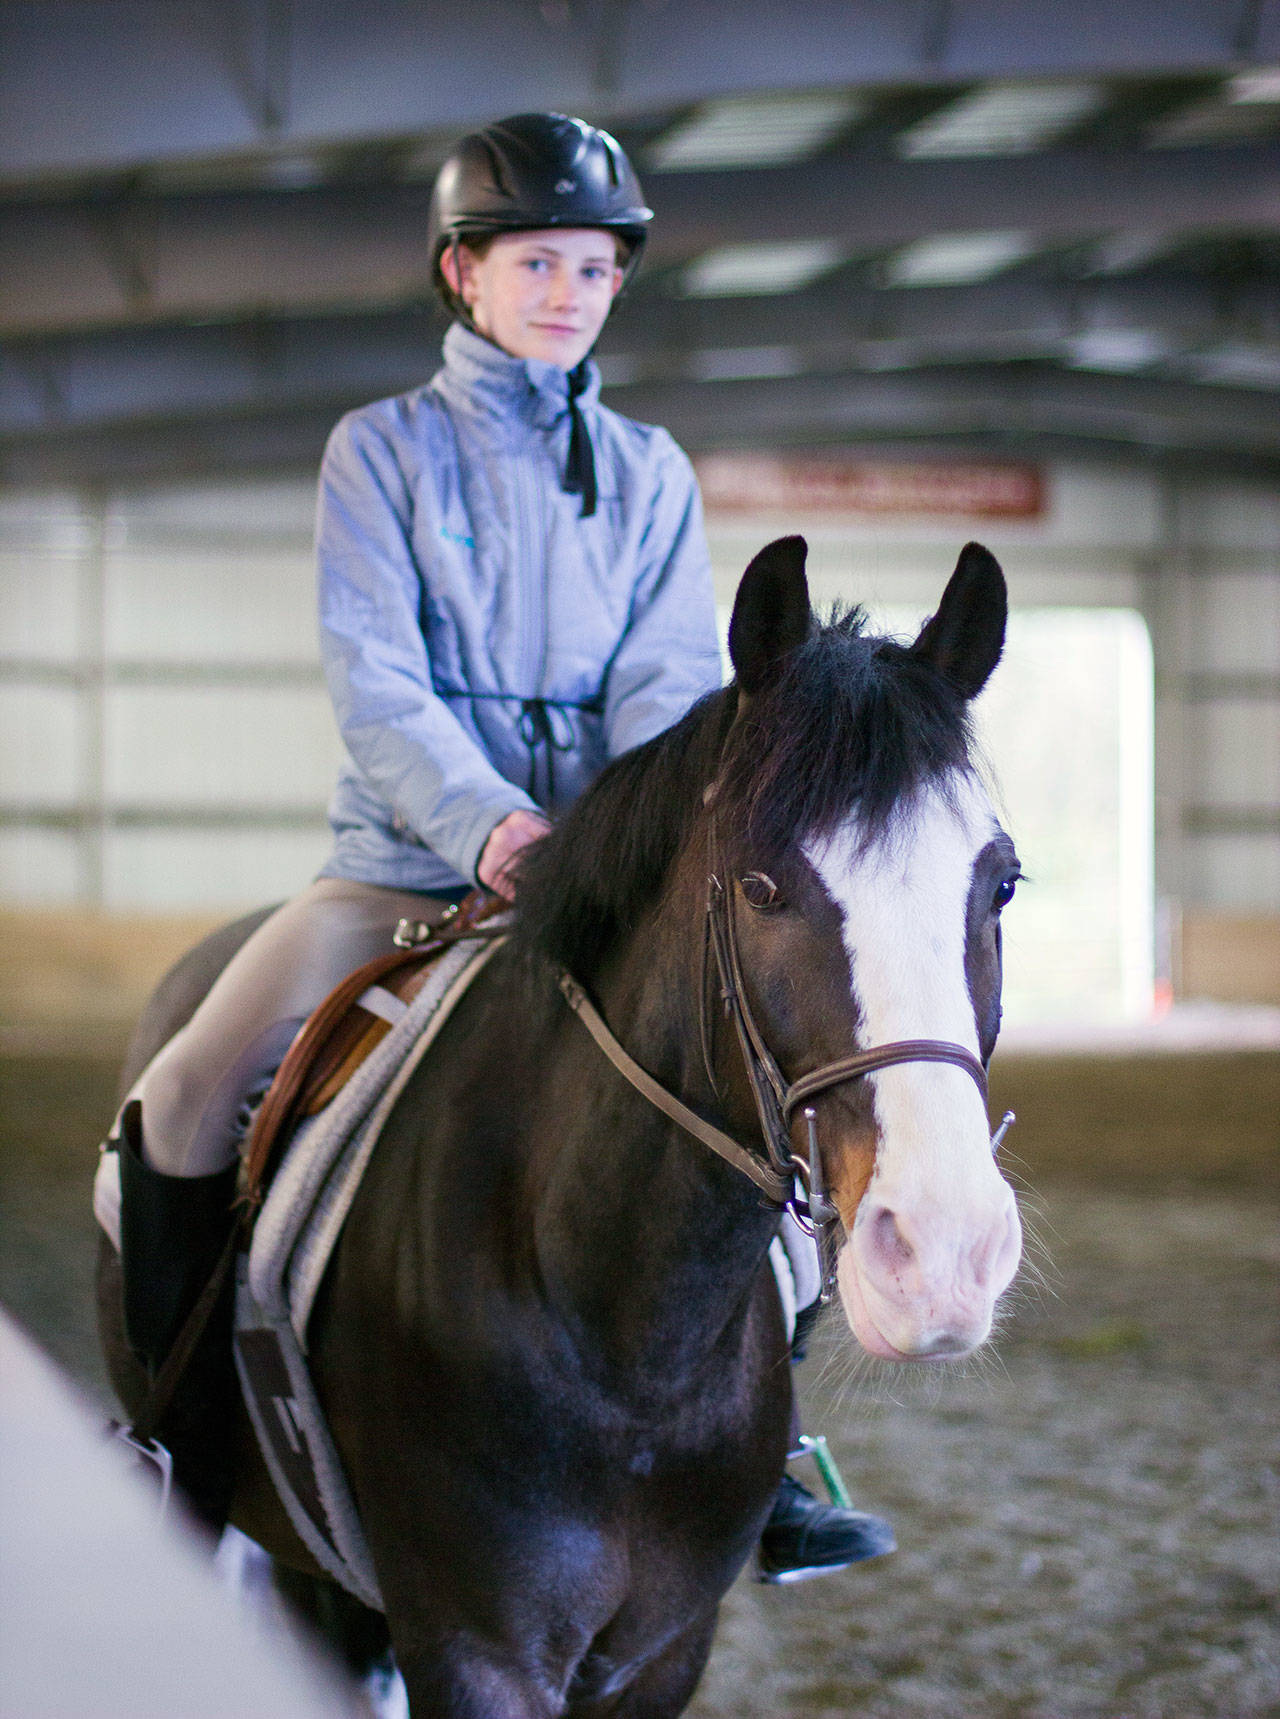 Ava O’Malley and her horse confidently enter the arena at the Sandamar Farm Winter Series show, April 15. (Sophie Bonomi / Kitsap News Group)